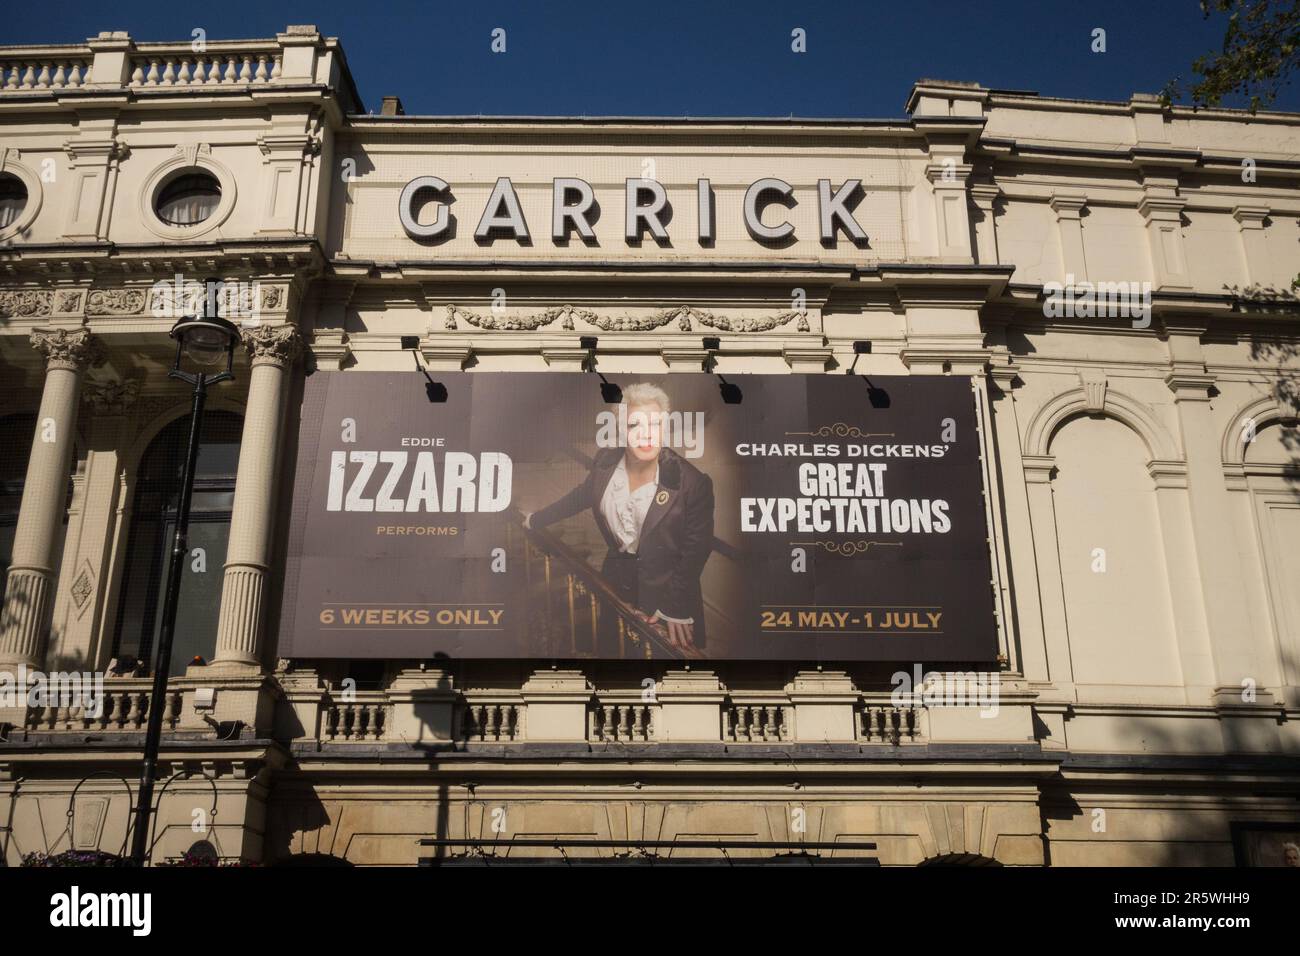 Eddie Izzard in Charles Dickens' Great Expectations at the Garrick Theatre on Charing Cross Road, London, England, UK Stock Photo